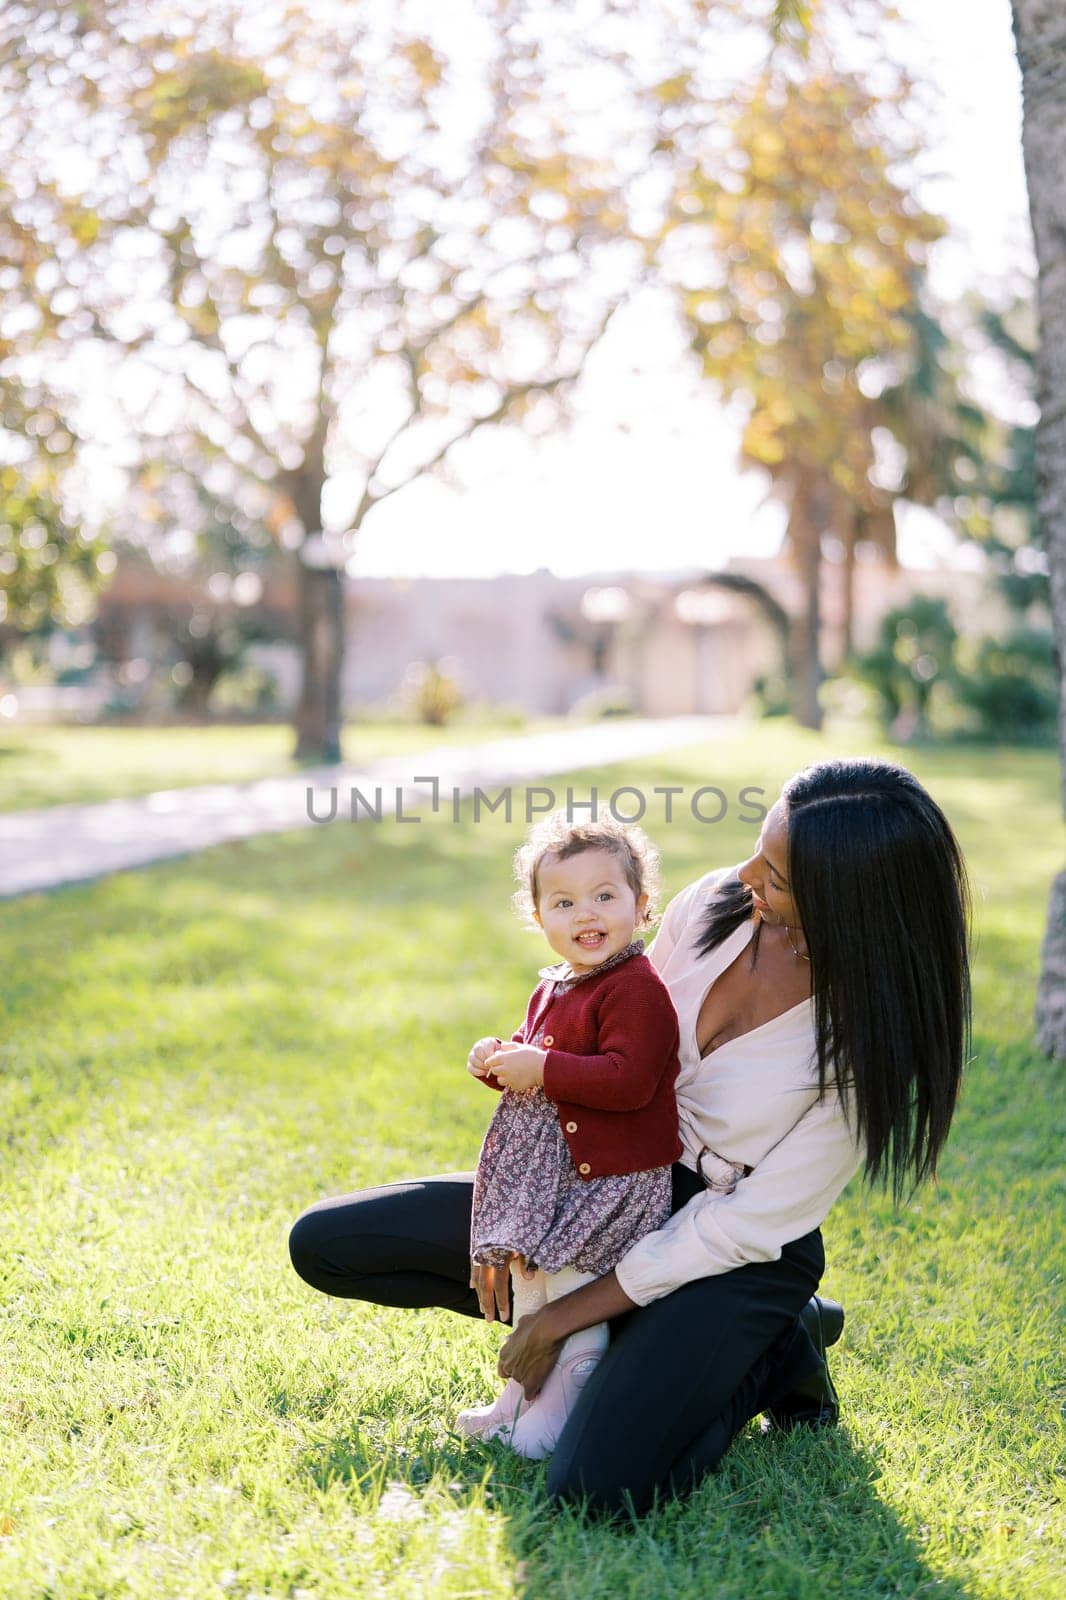 Mom squatted down next to a little smiling girl in a sunny meadow. High quality photo